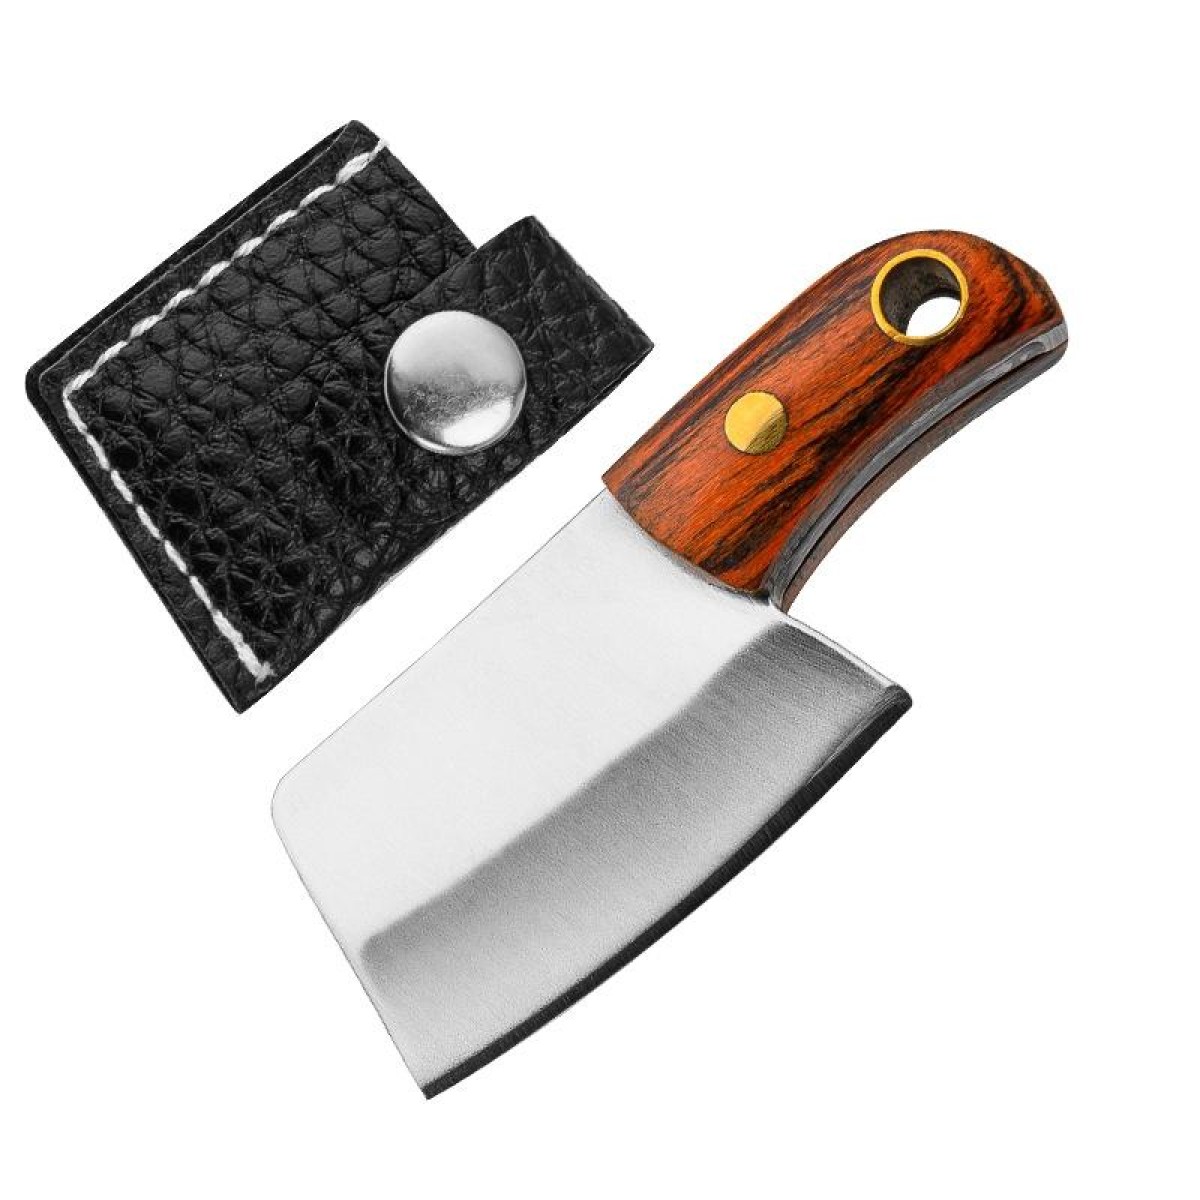 Mini Knife Keychain Portable Removal Express Pendant Accessory With Holster, Model: Colorful Wood Sanding